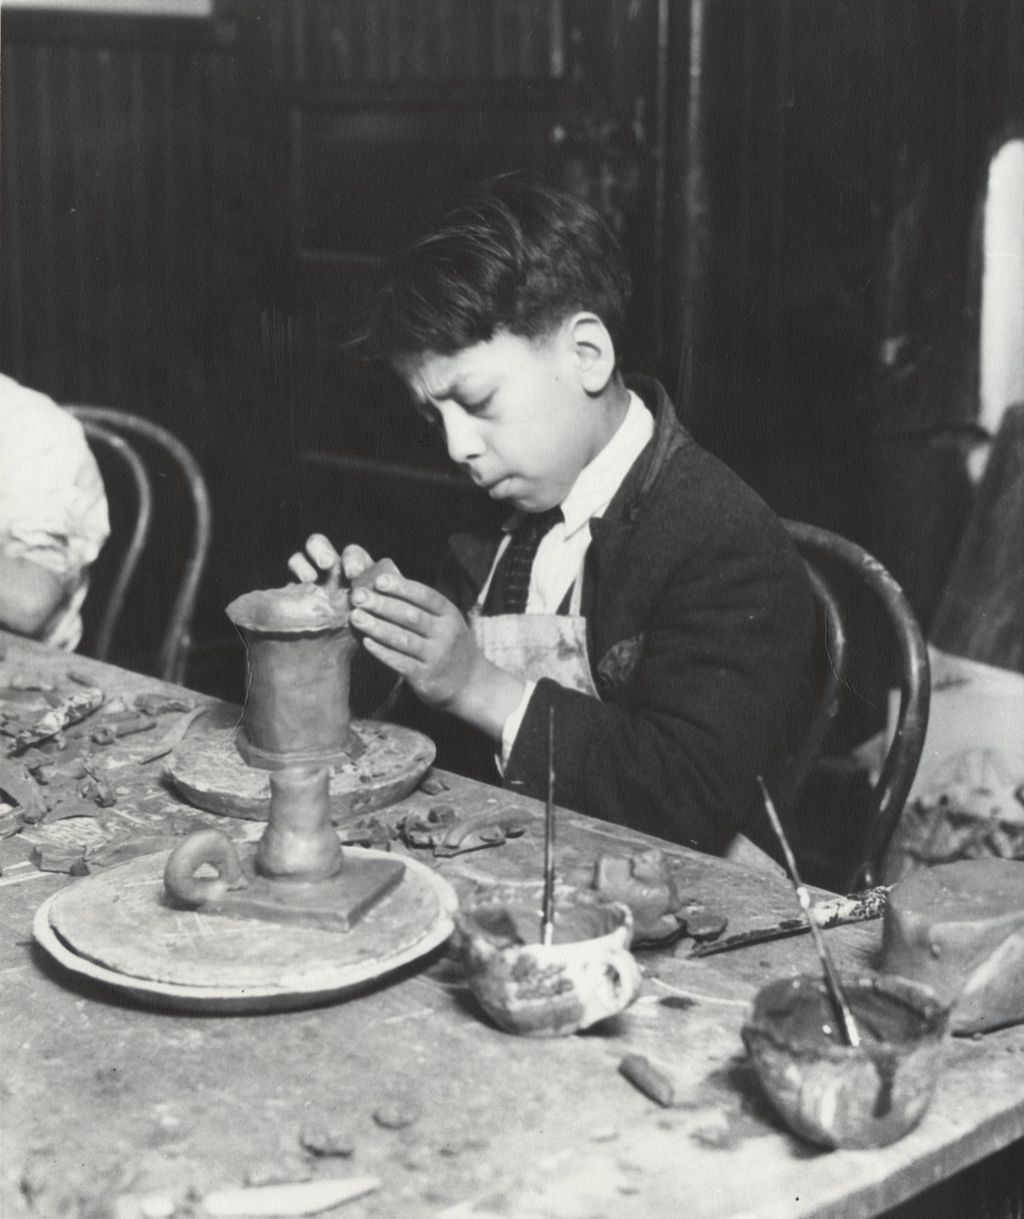 Miniature of Boy in Hull-House ceramics class putting finishing touches on clay vase